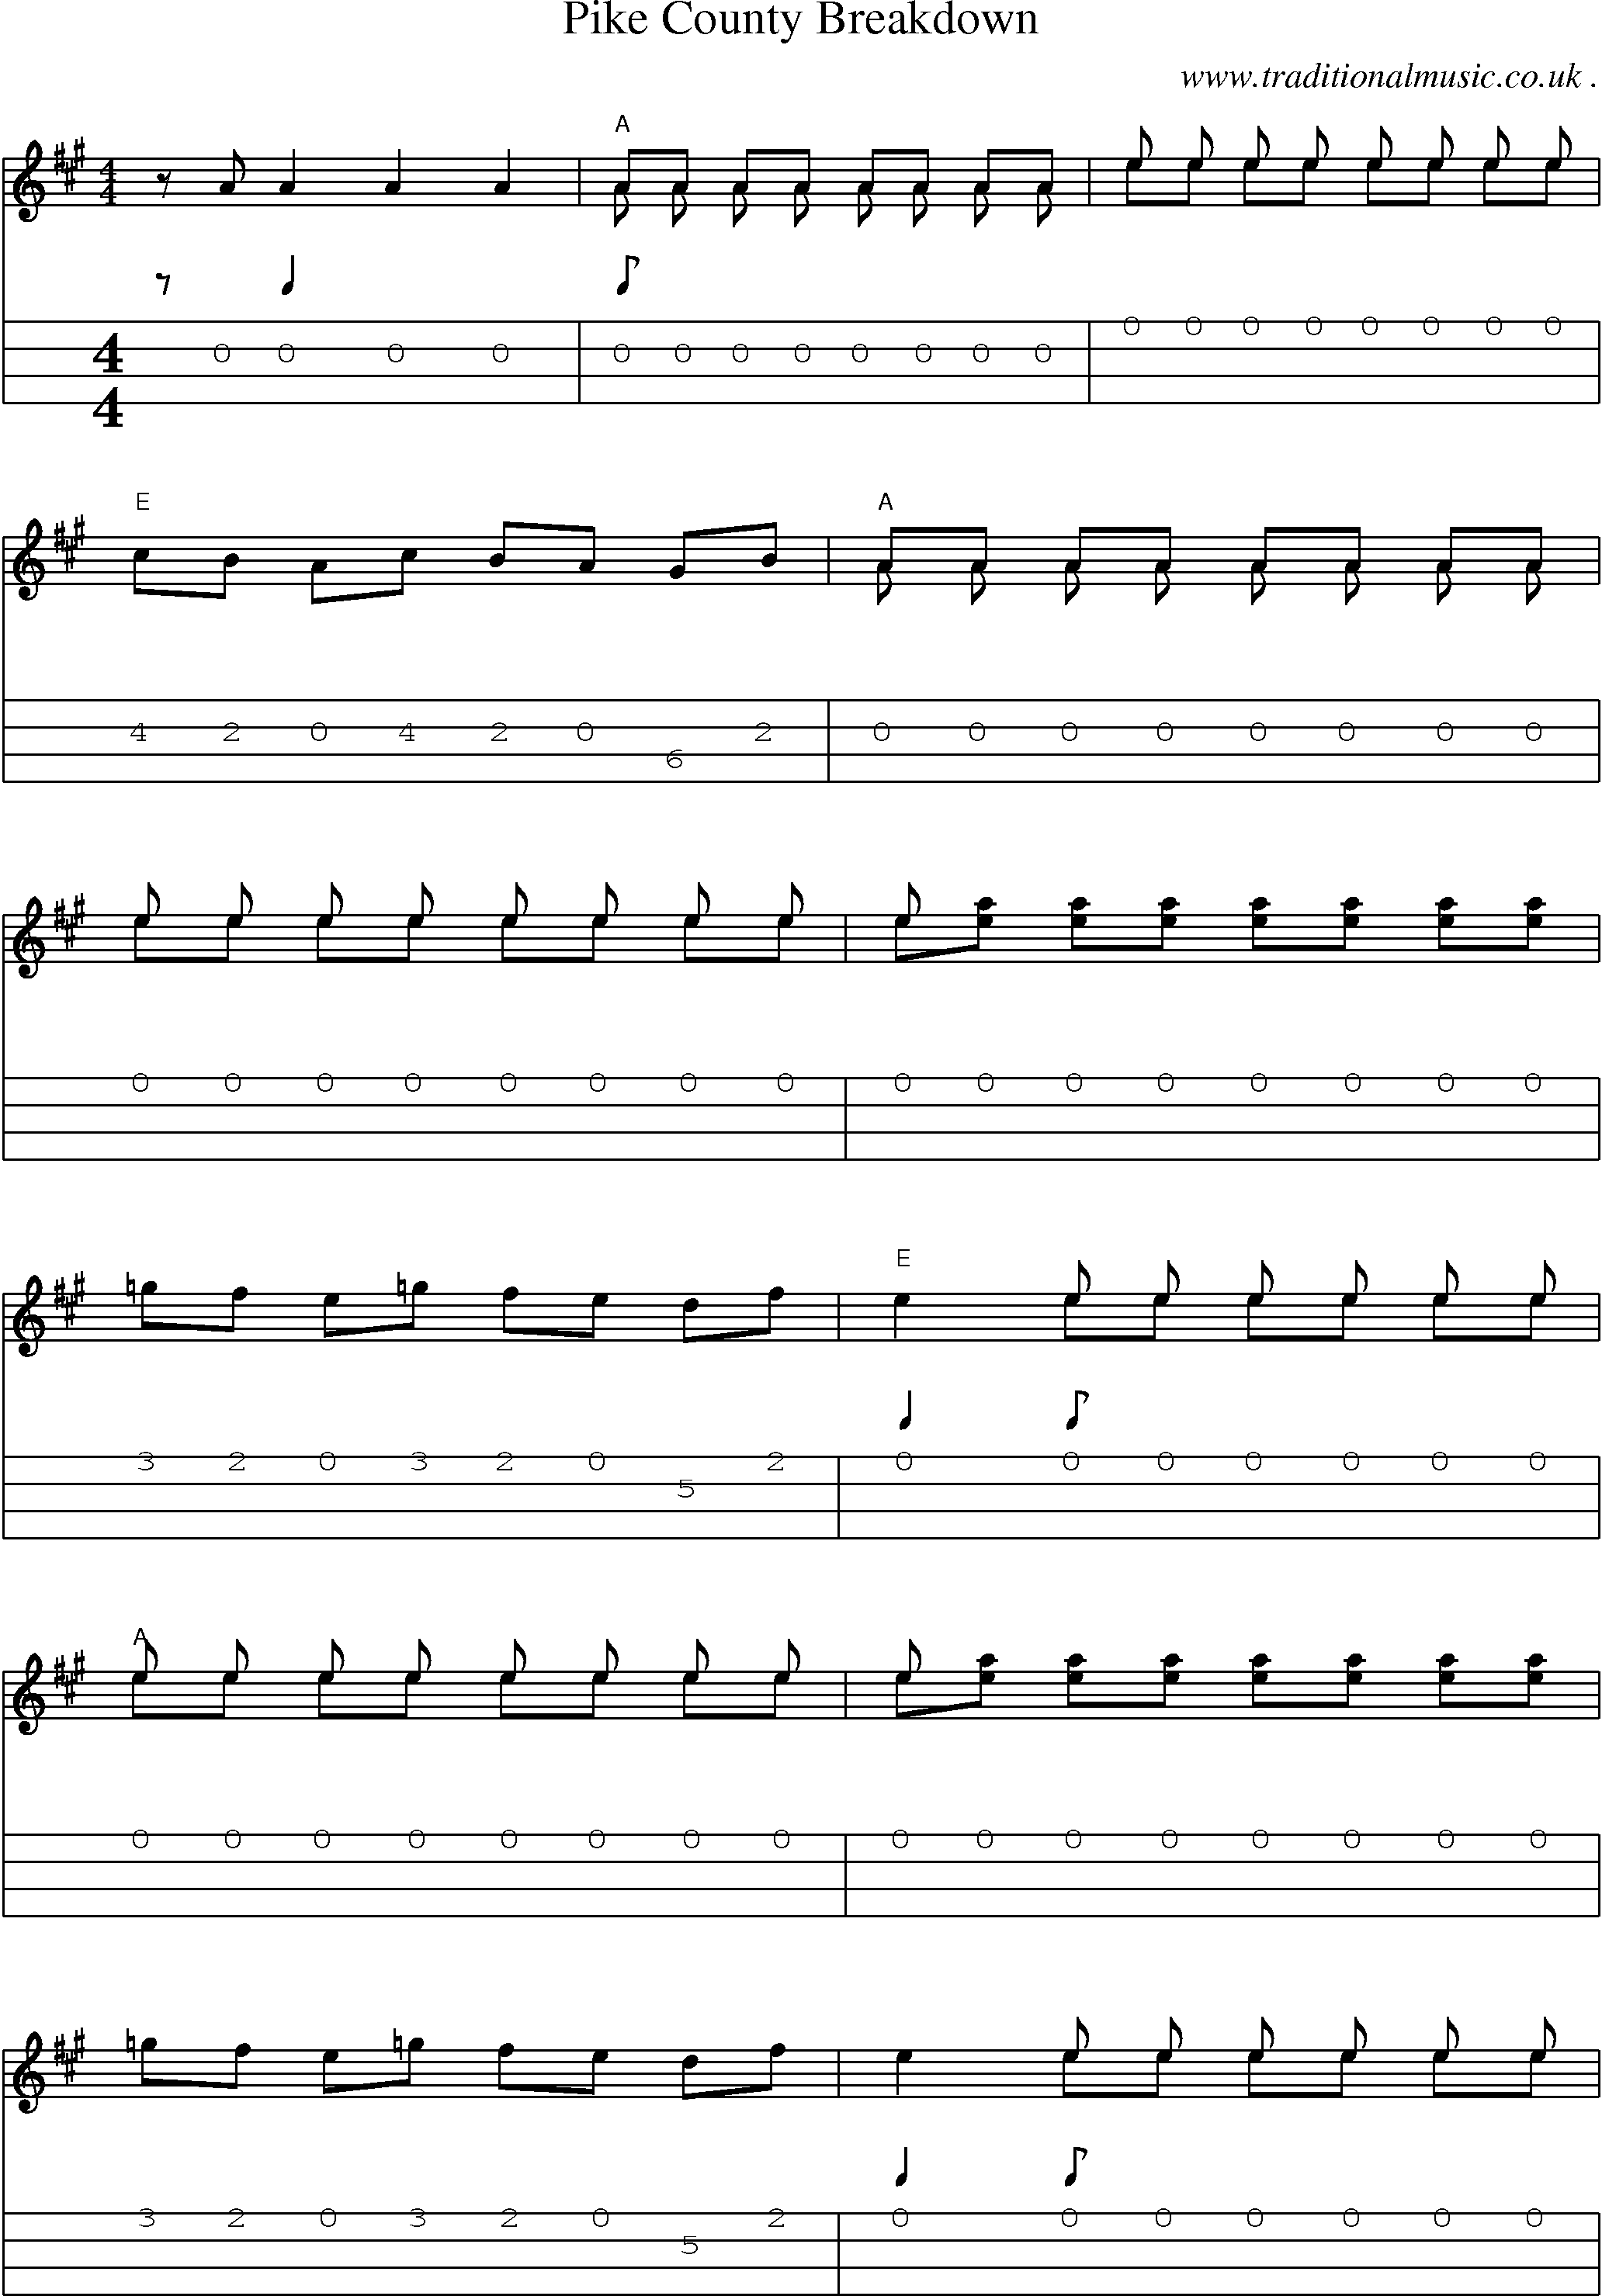 Music Score and Mandolin Tabs for Pike County Breakdown